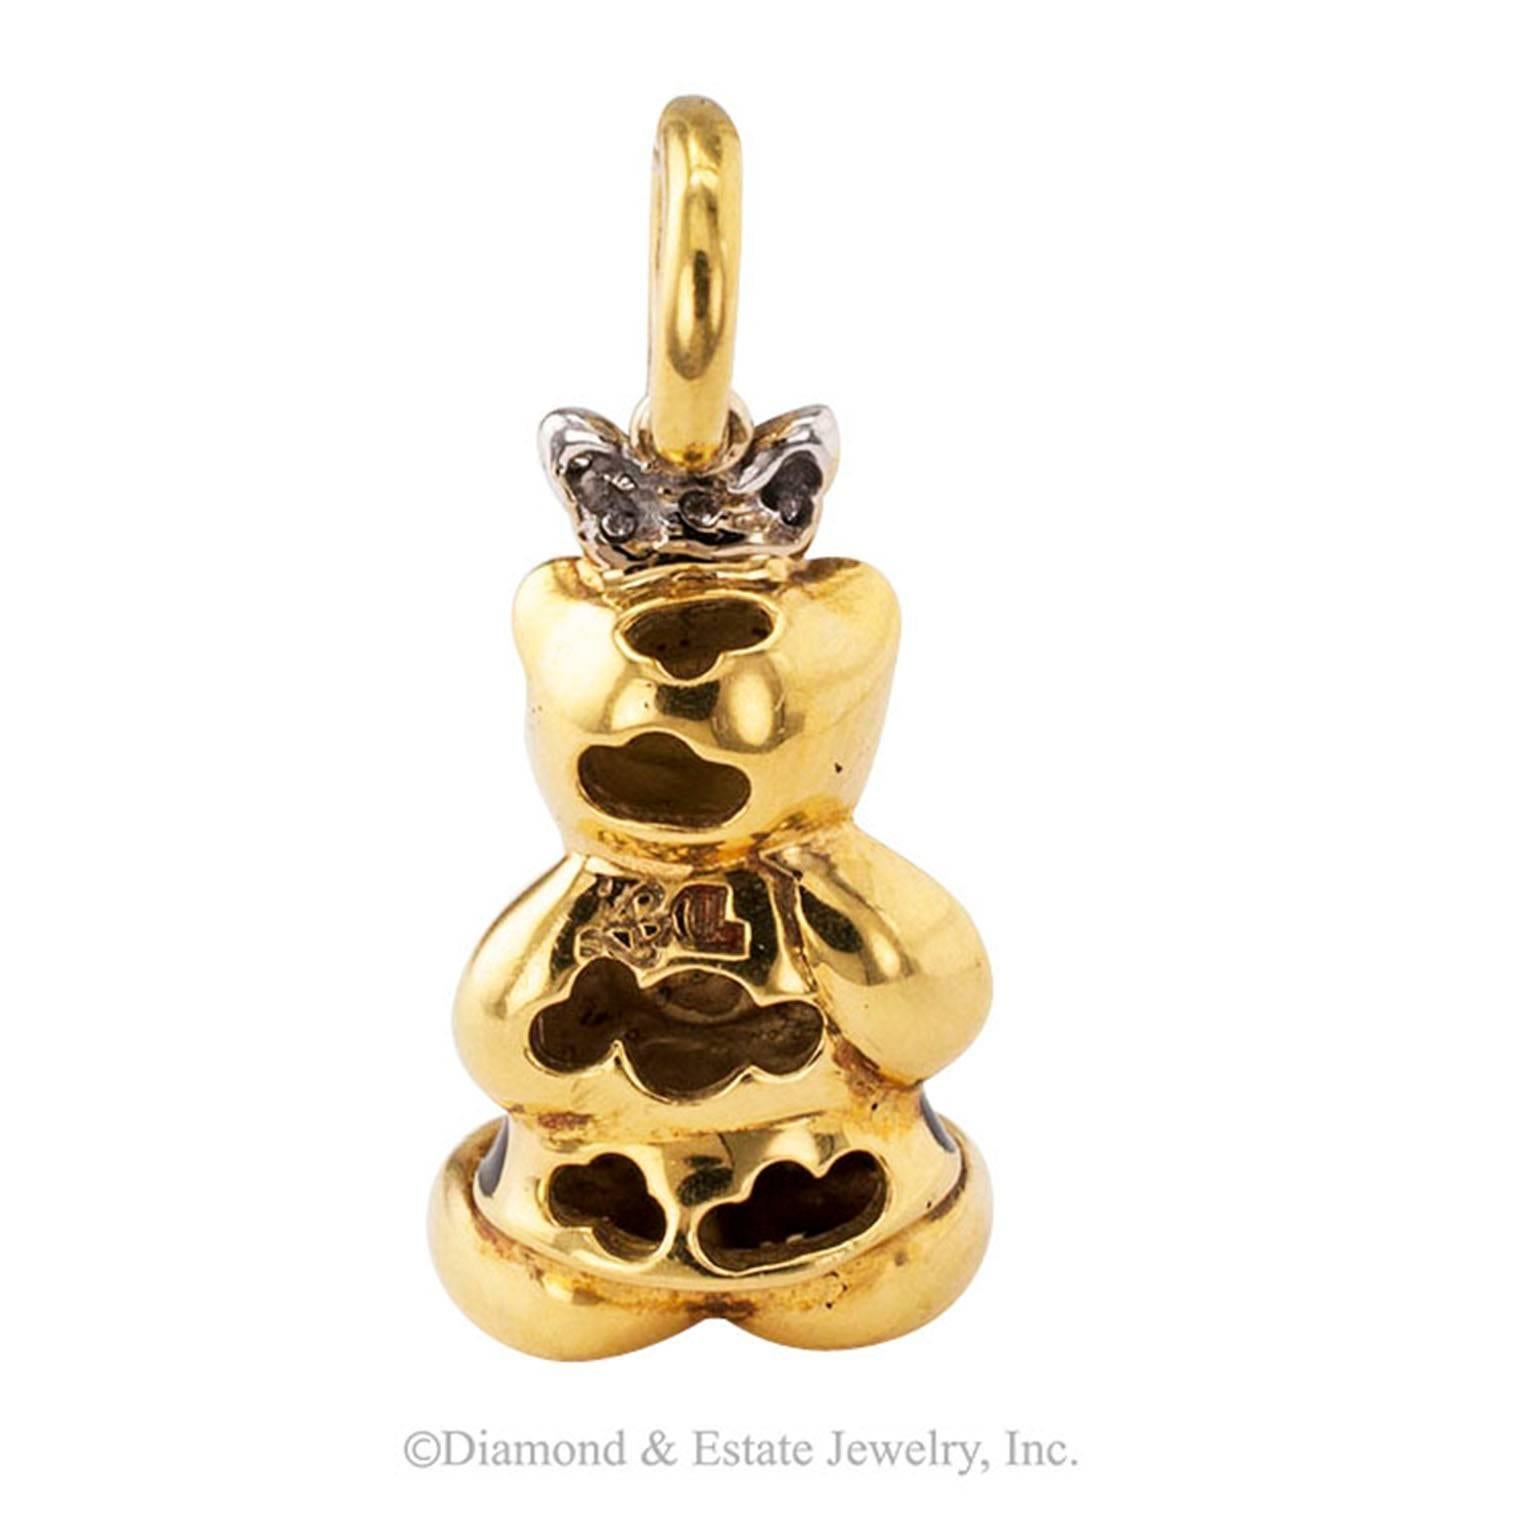 Aaron Basha Enamel Diamond Bear Charm-pendant

Aaron Basha enamel and diamond gold bear charm-pendant.  Decorated with black enamel to enhance facial features and dress and a diamond bow atop the head.
DIMENSIONS:  1 1/4